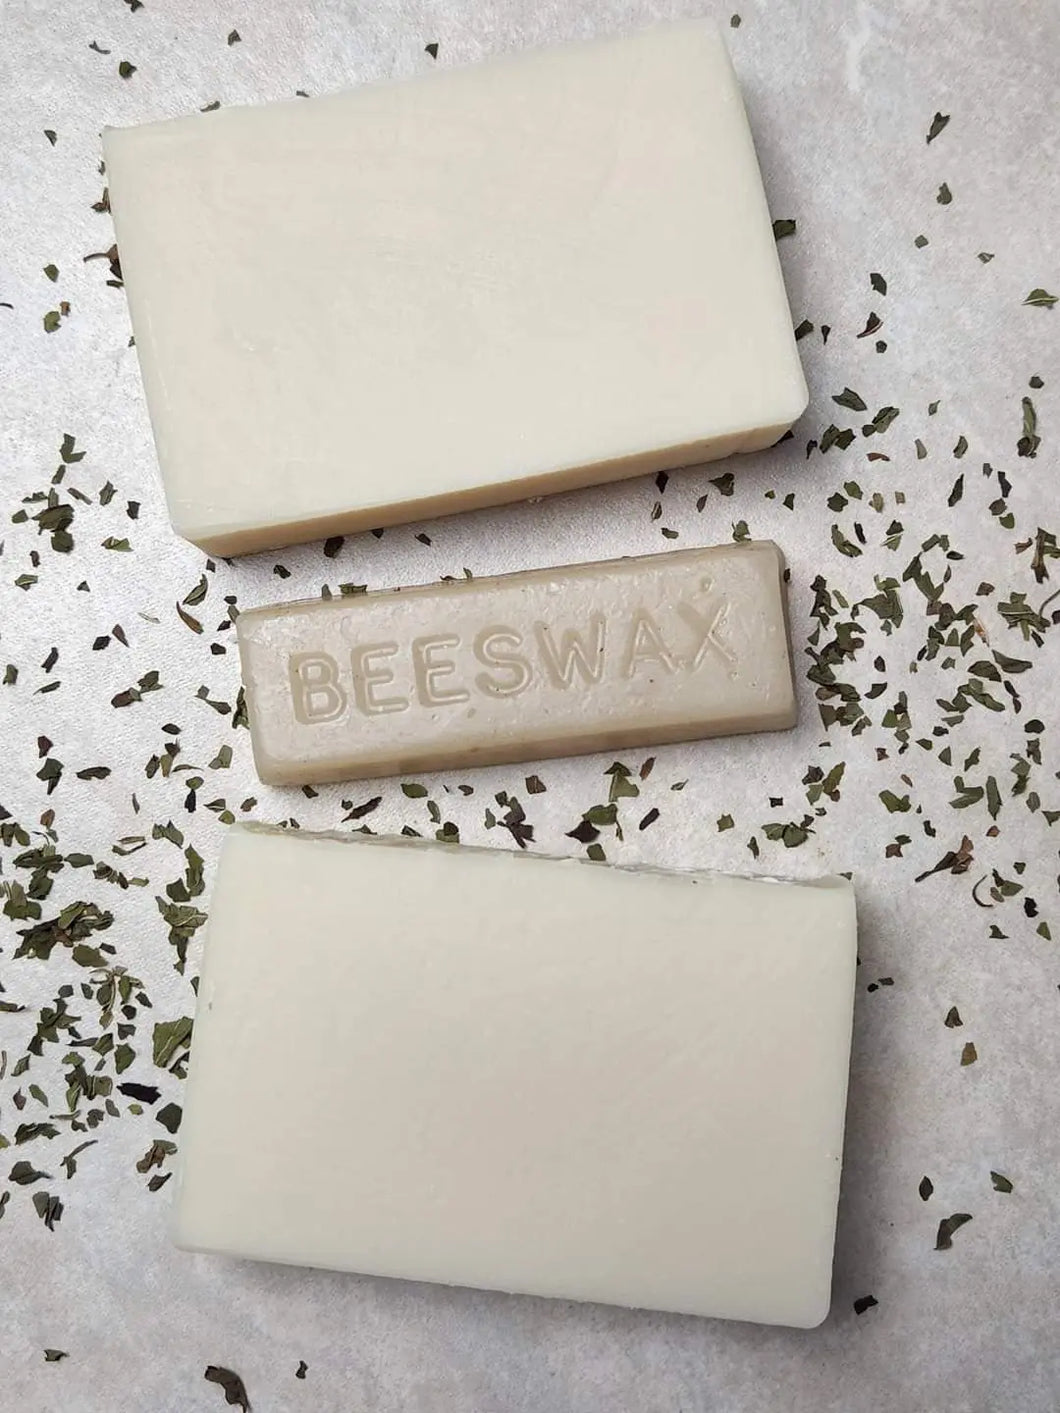 Beeswax Peppermint Soap Earthly Soap Goods